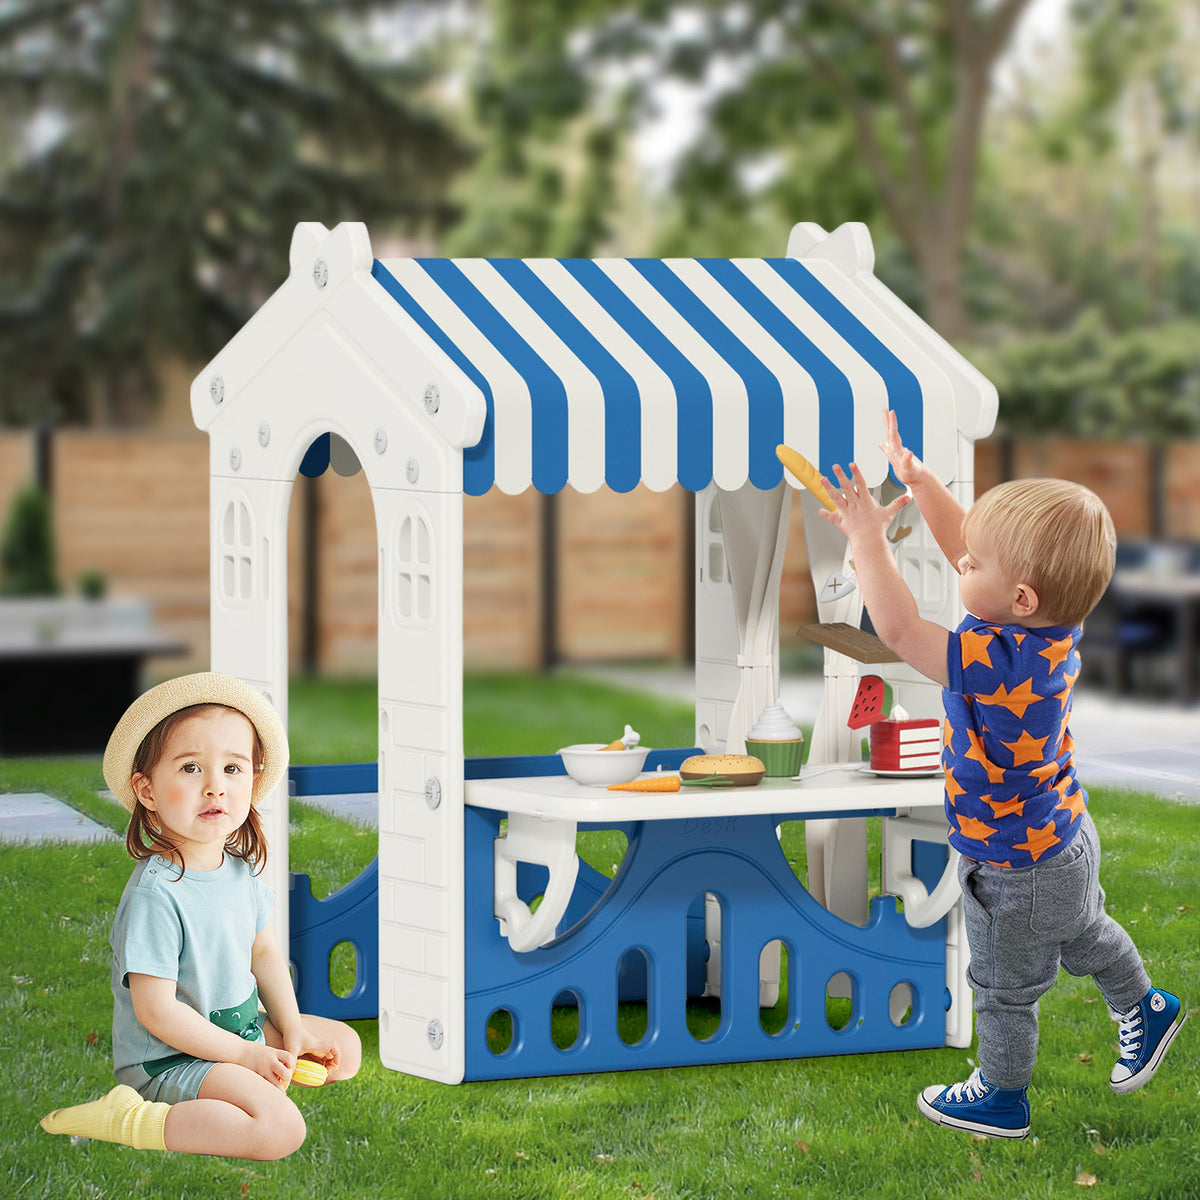 XJD Kids Cottage Playhouse, Toddler Indoor&Outdoor Playhouse, Blue